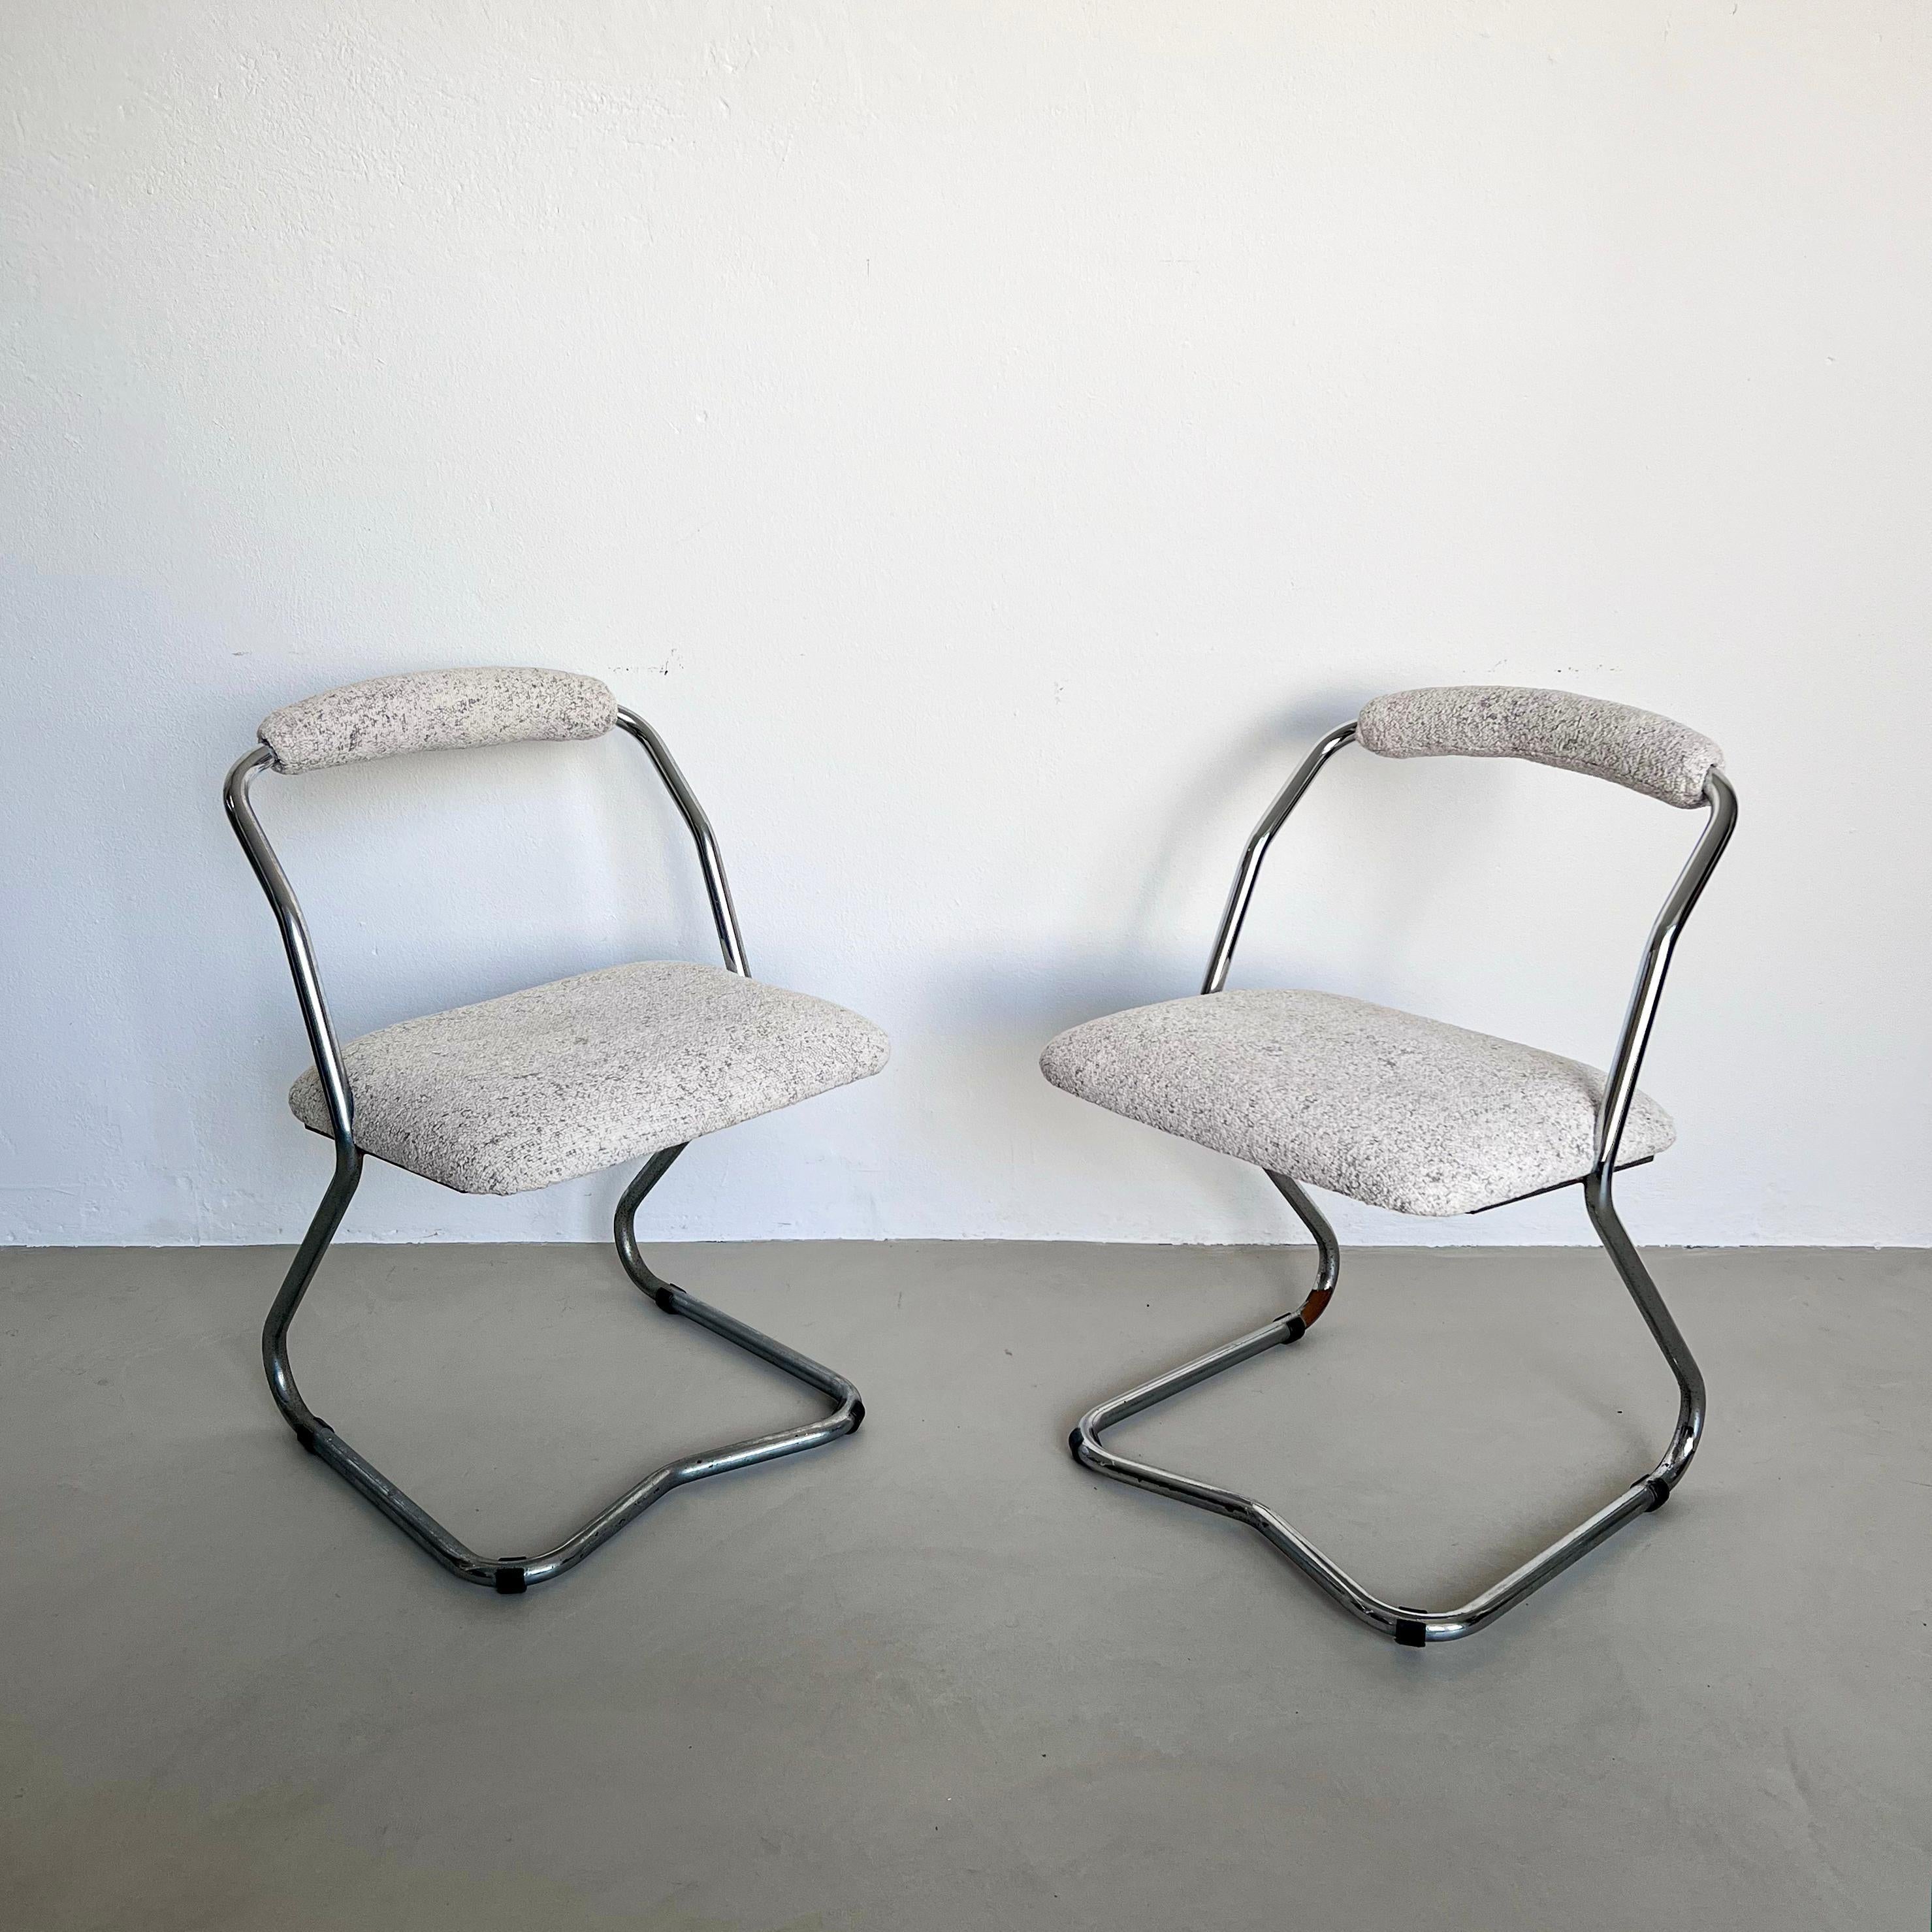 Italian Vintage Set of Four Chromed Metal Dining Room Chairs in White Bouclé Upholstery For Sale